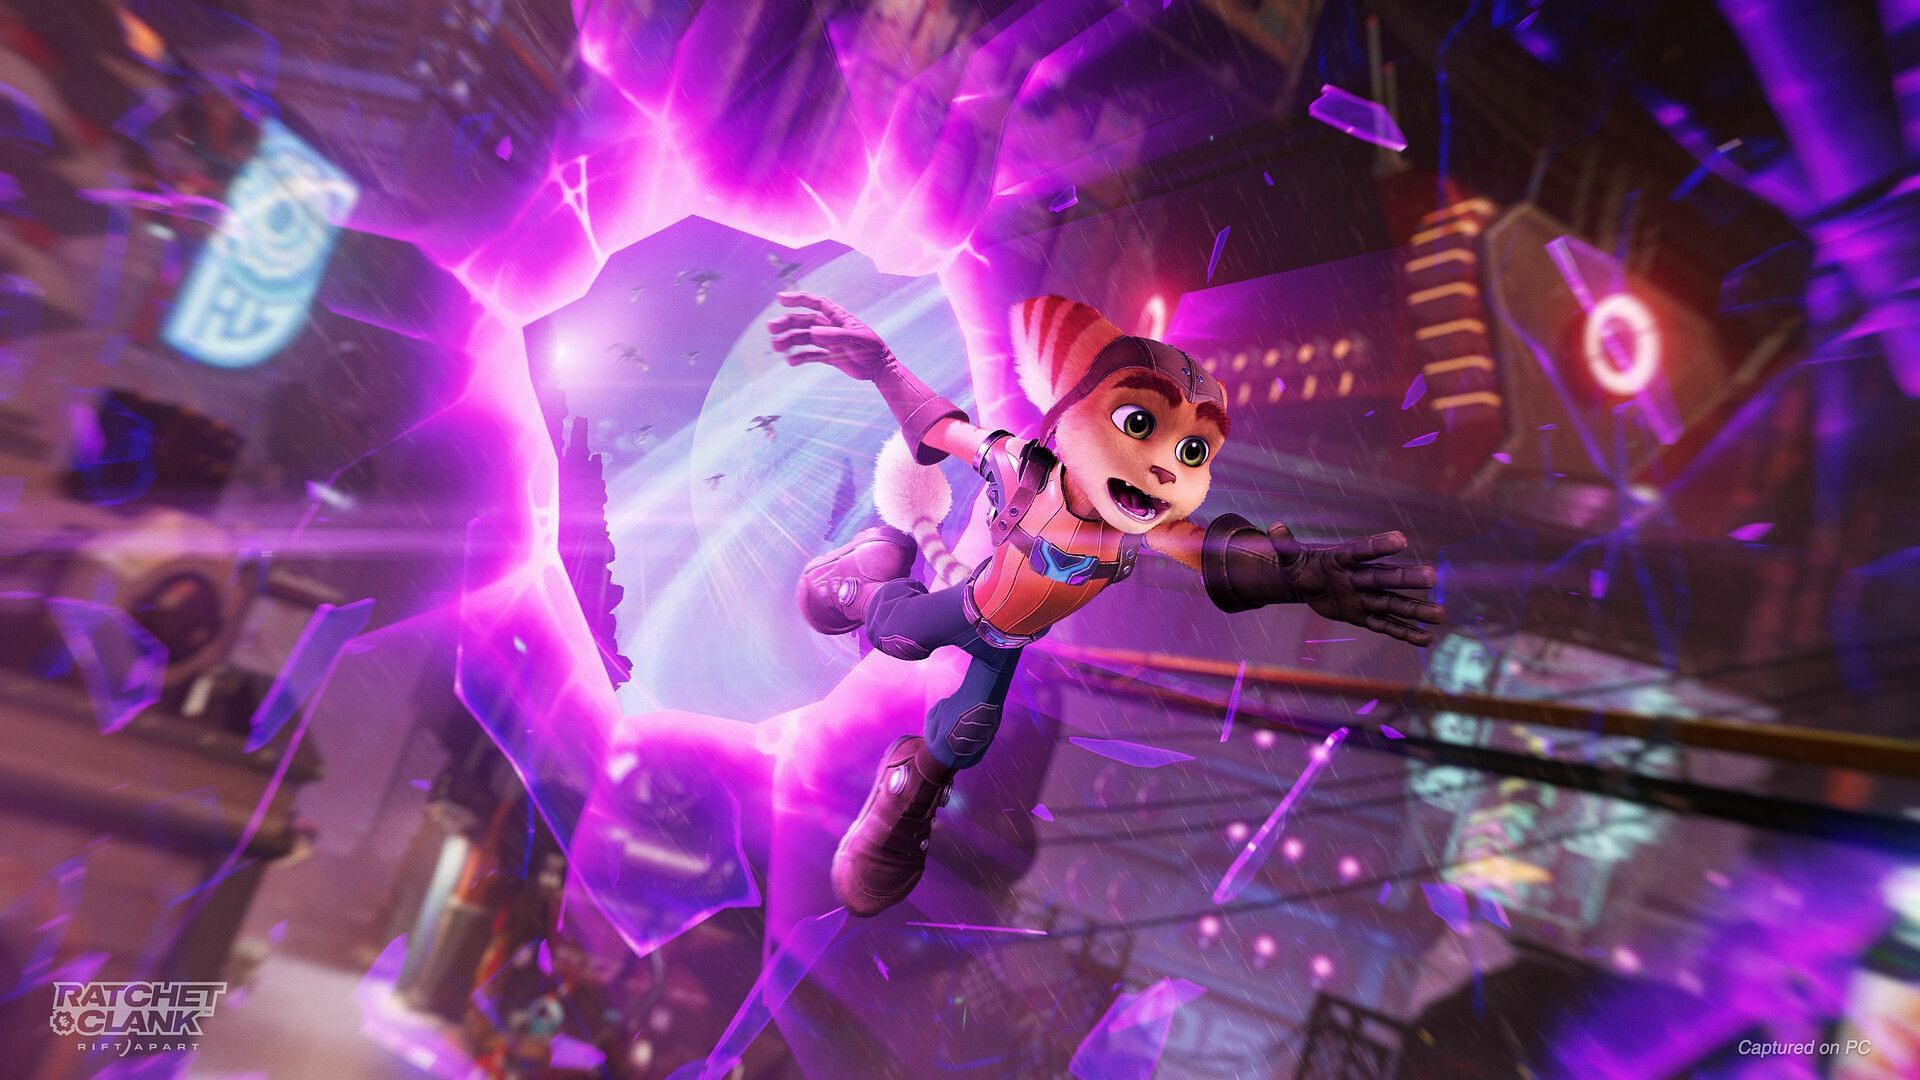 A new Ratchet &amp; Clank title is reportedly in the works (Image via Steam)